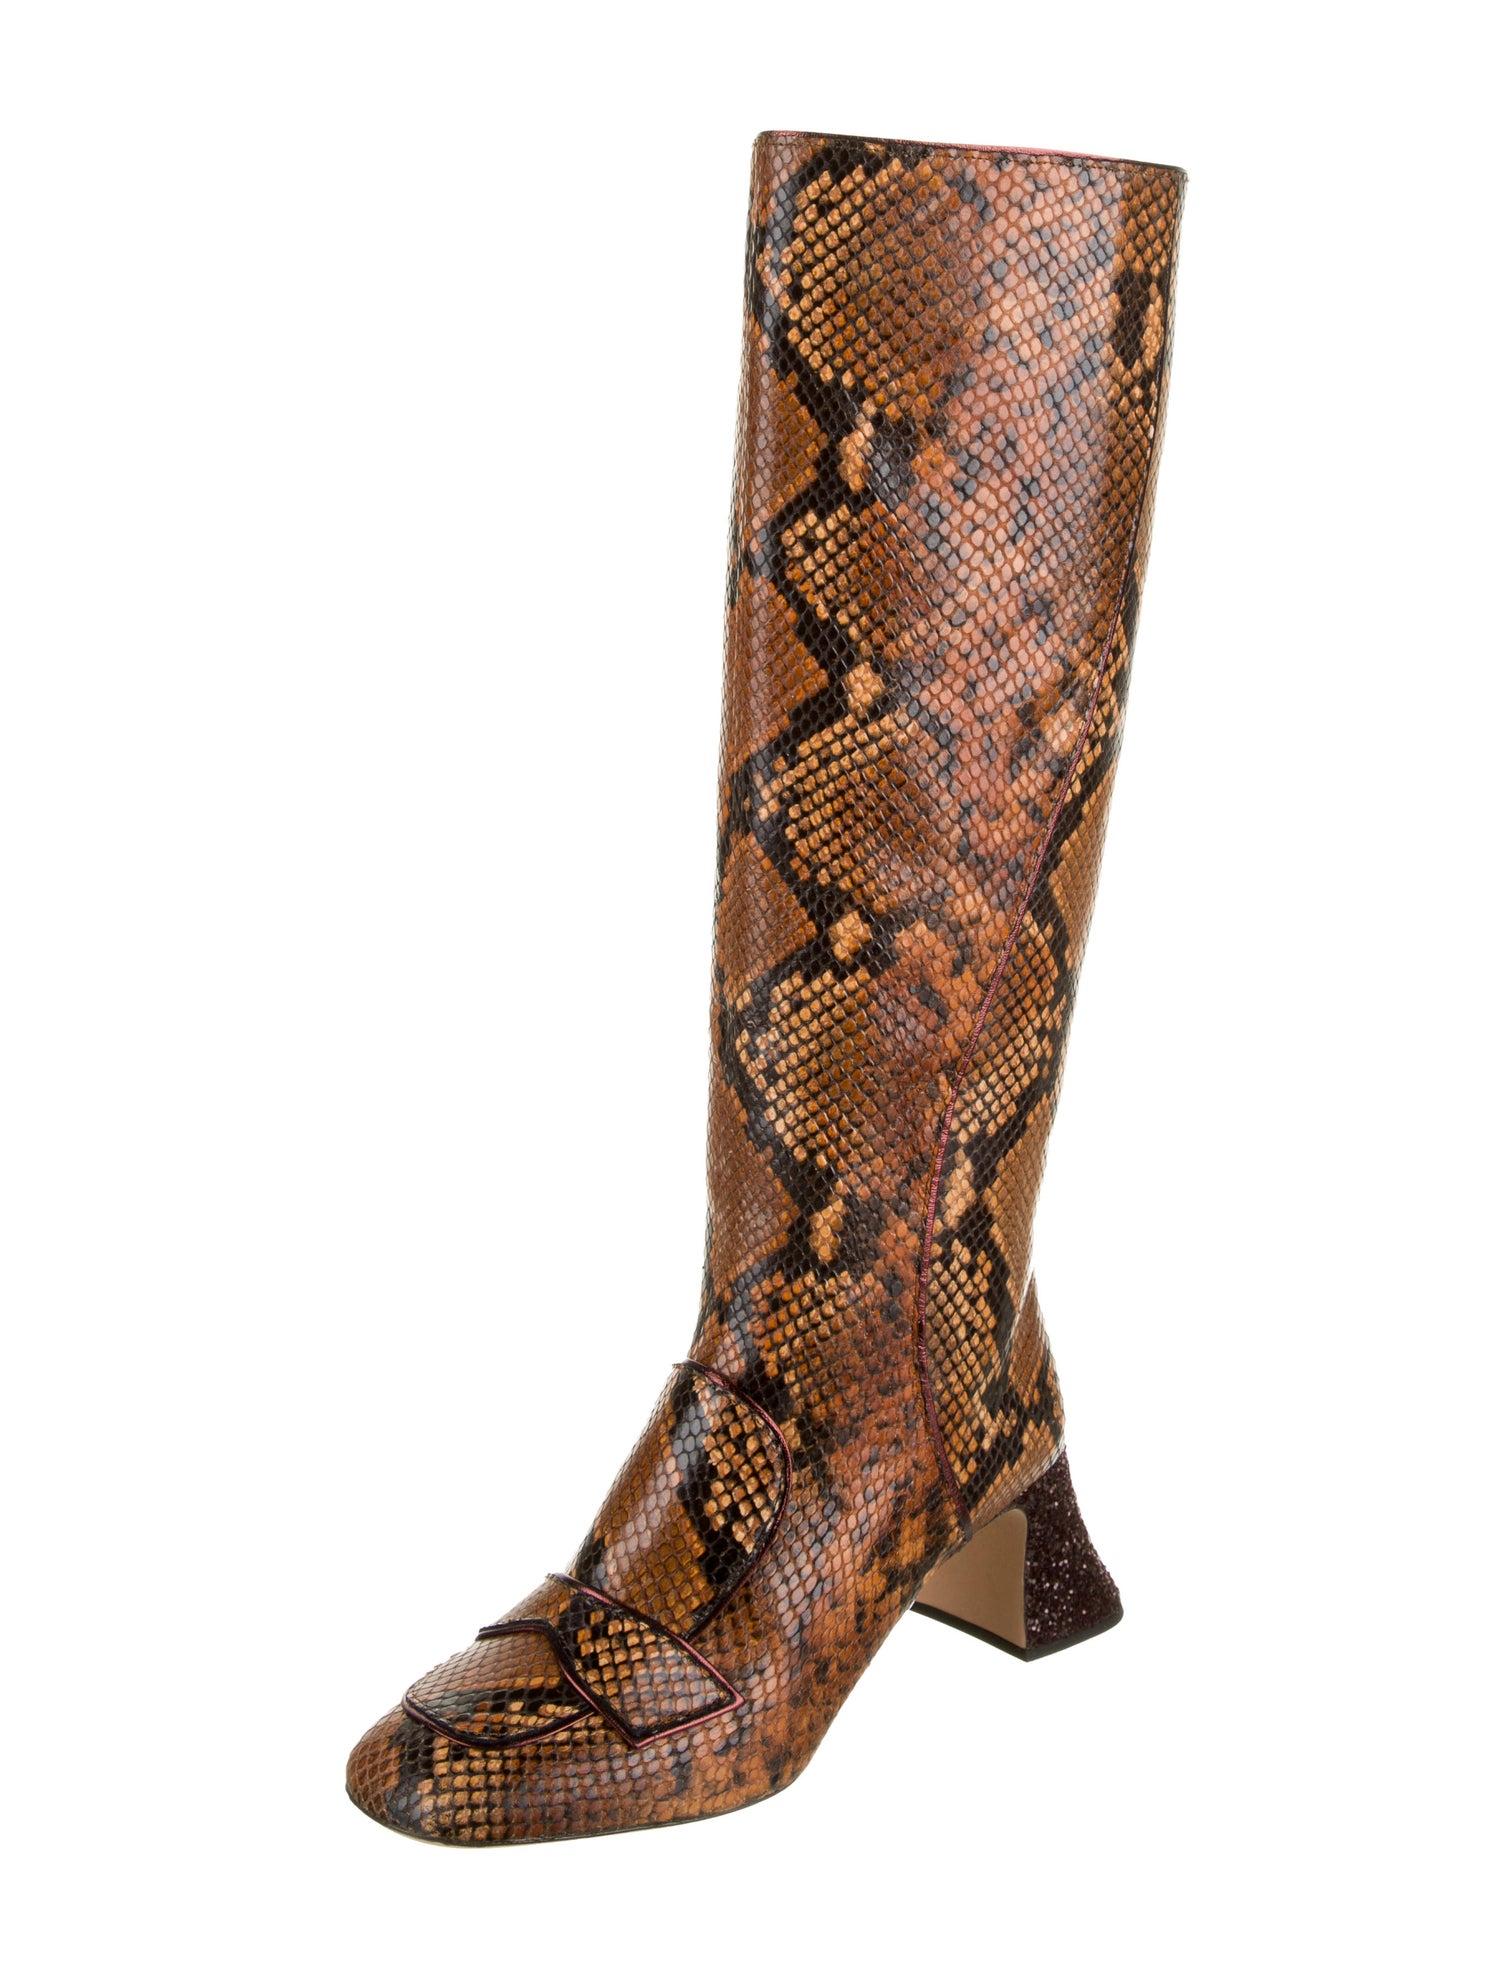 New Rochas Python Crystal Pascal Boots F/W 2018 Size 38 2